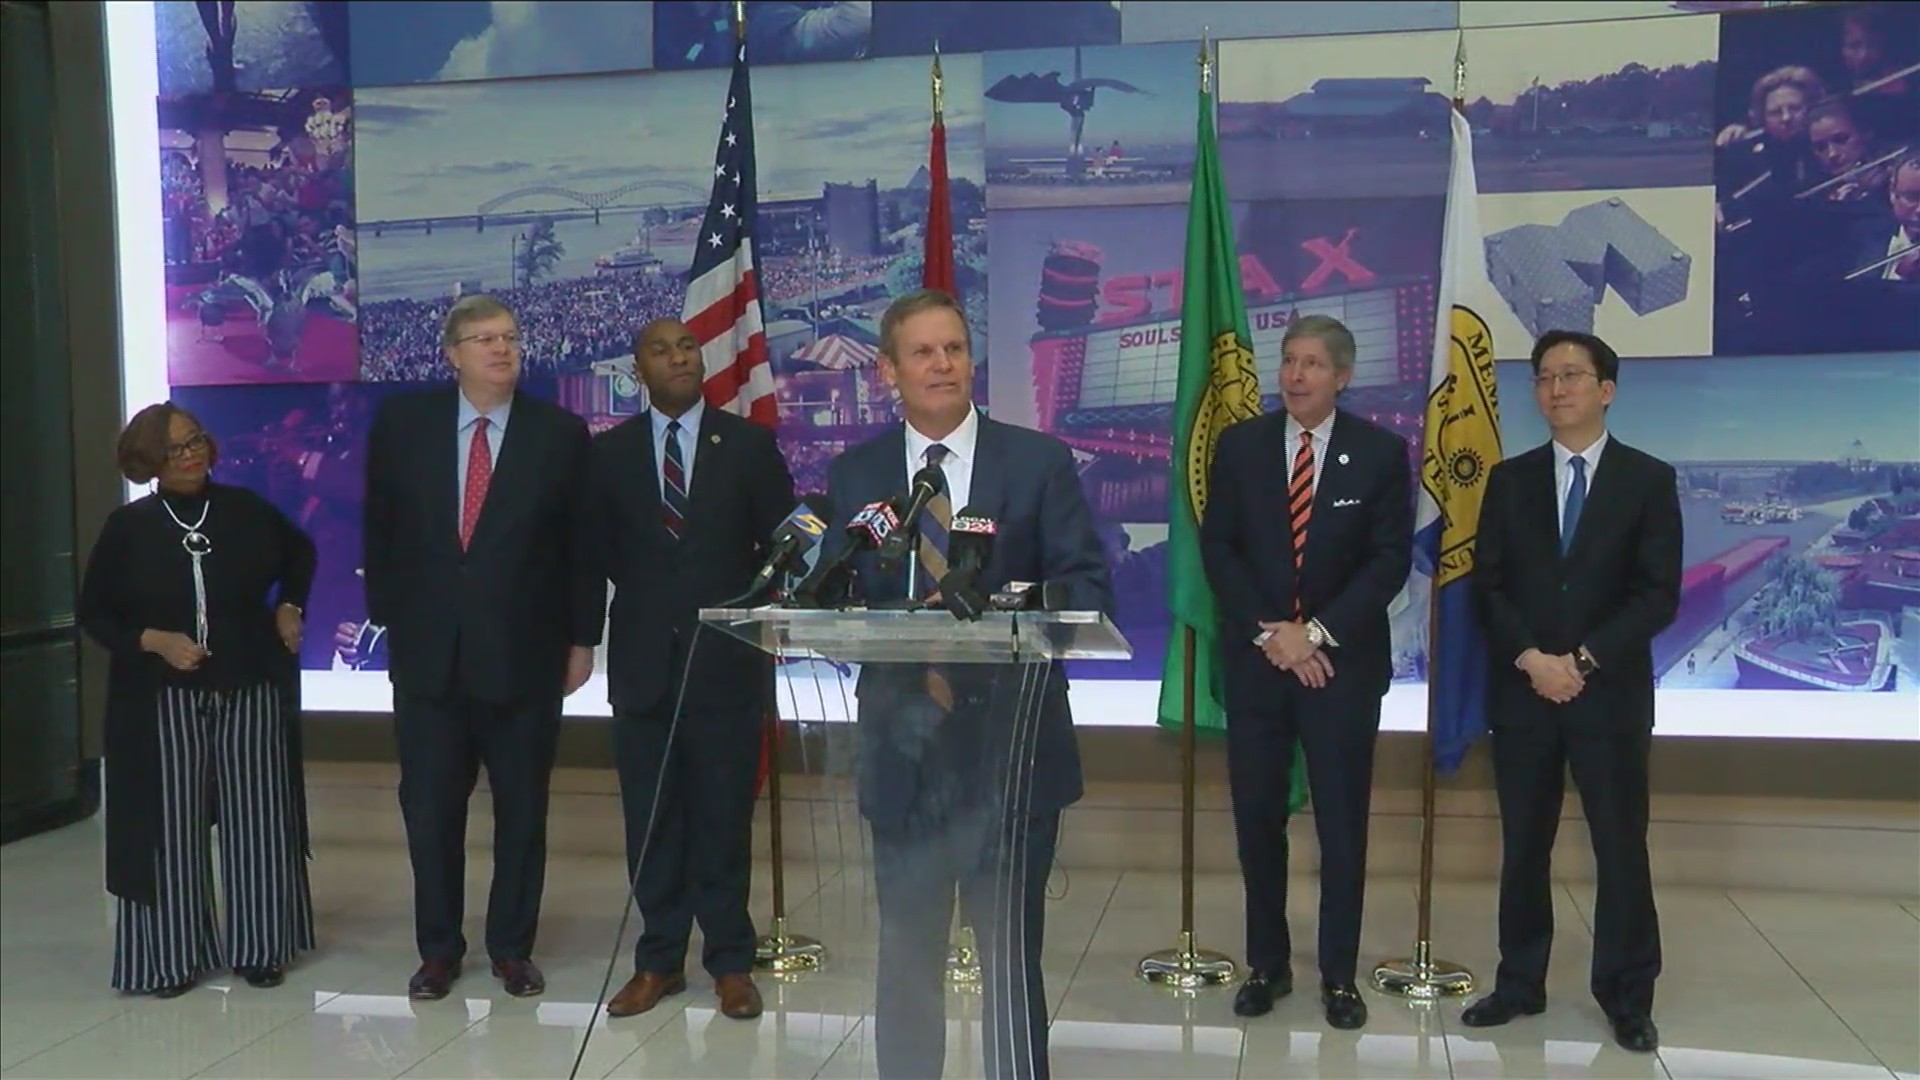 Gov. Bill Lee & local leaders announce Korean company will locate first U.S. production operations in Memphis